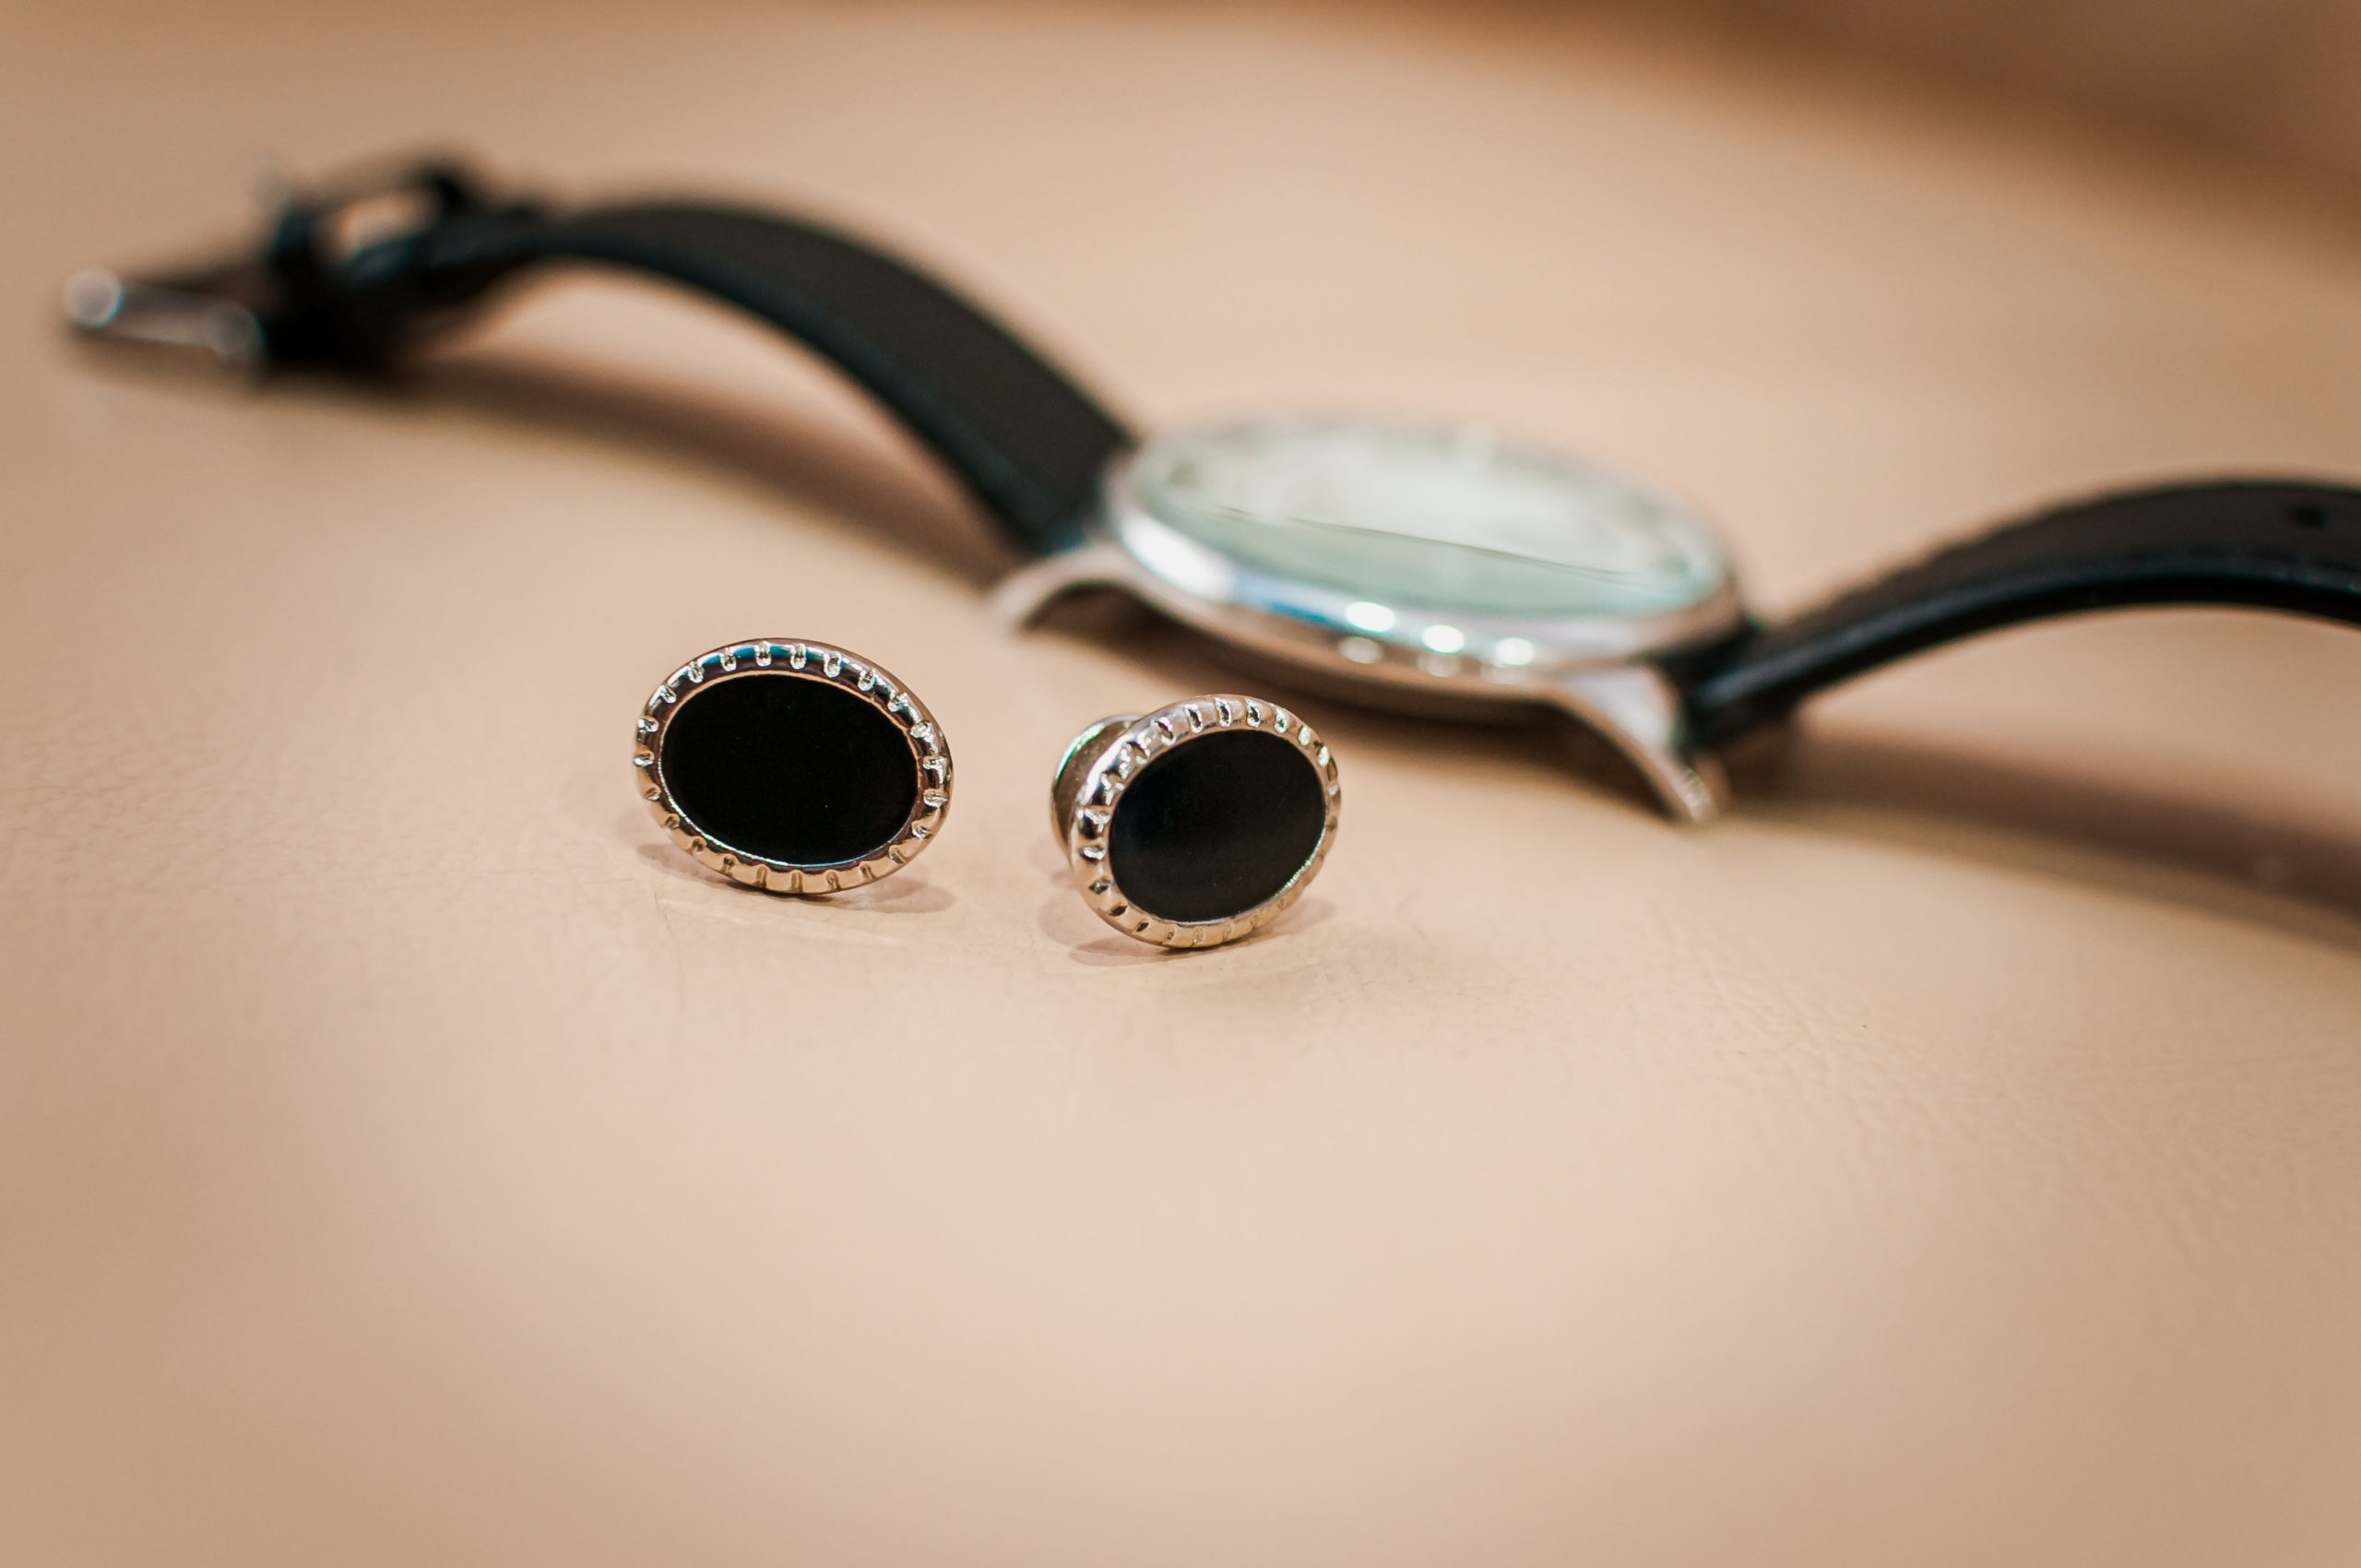 Men's cufflinks and a watch with a black strap on a brown background